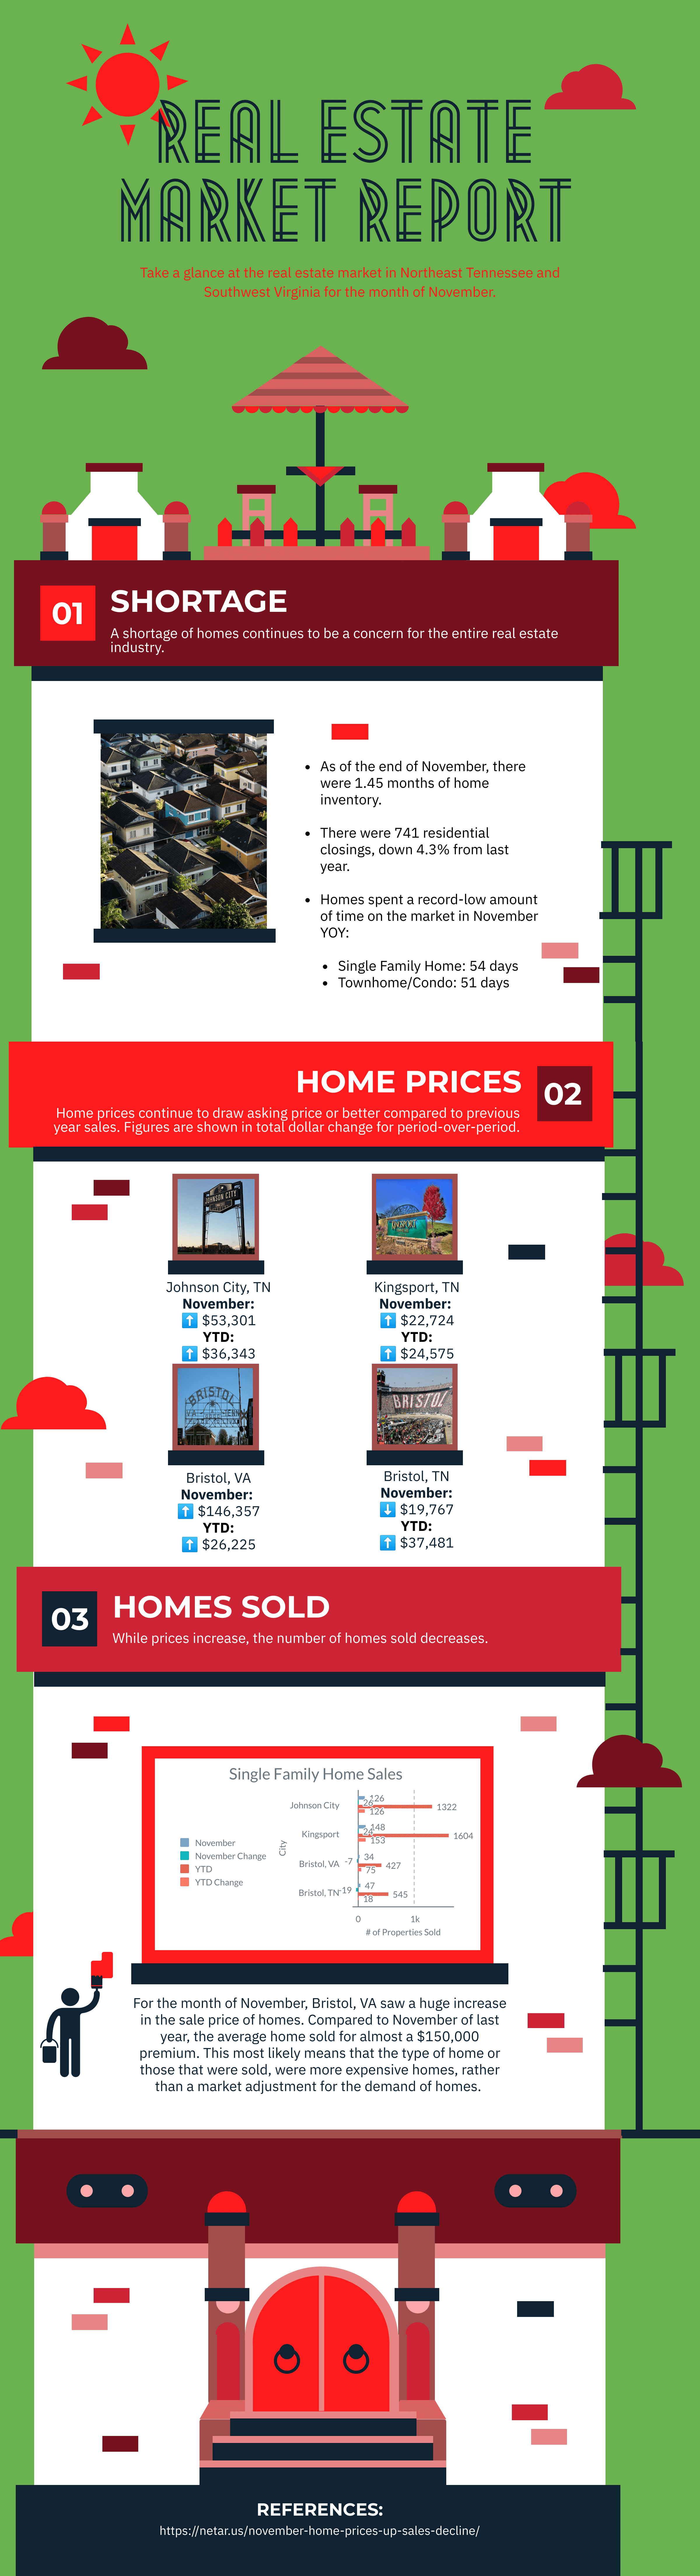 infographic, real estate, market report, tri cities